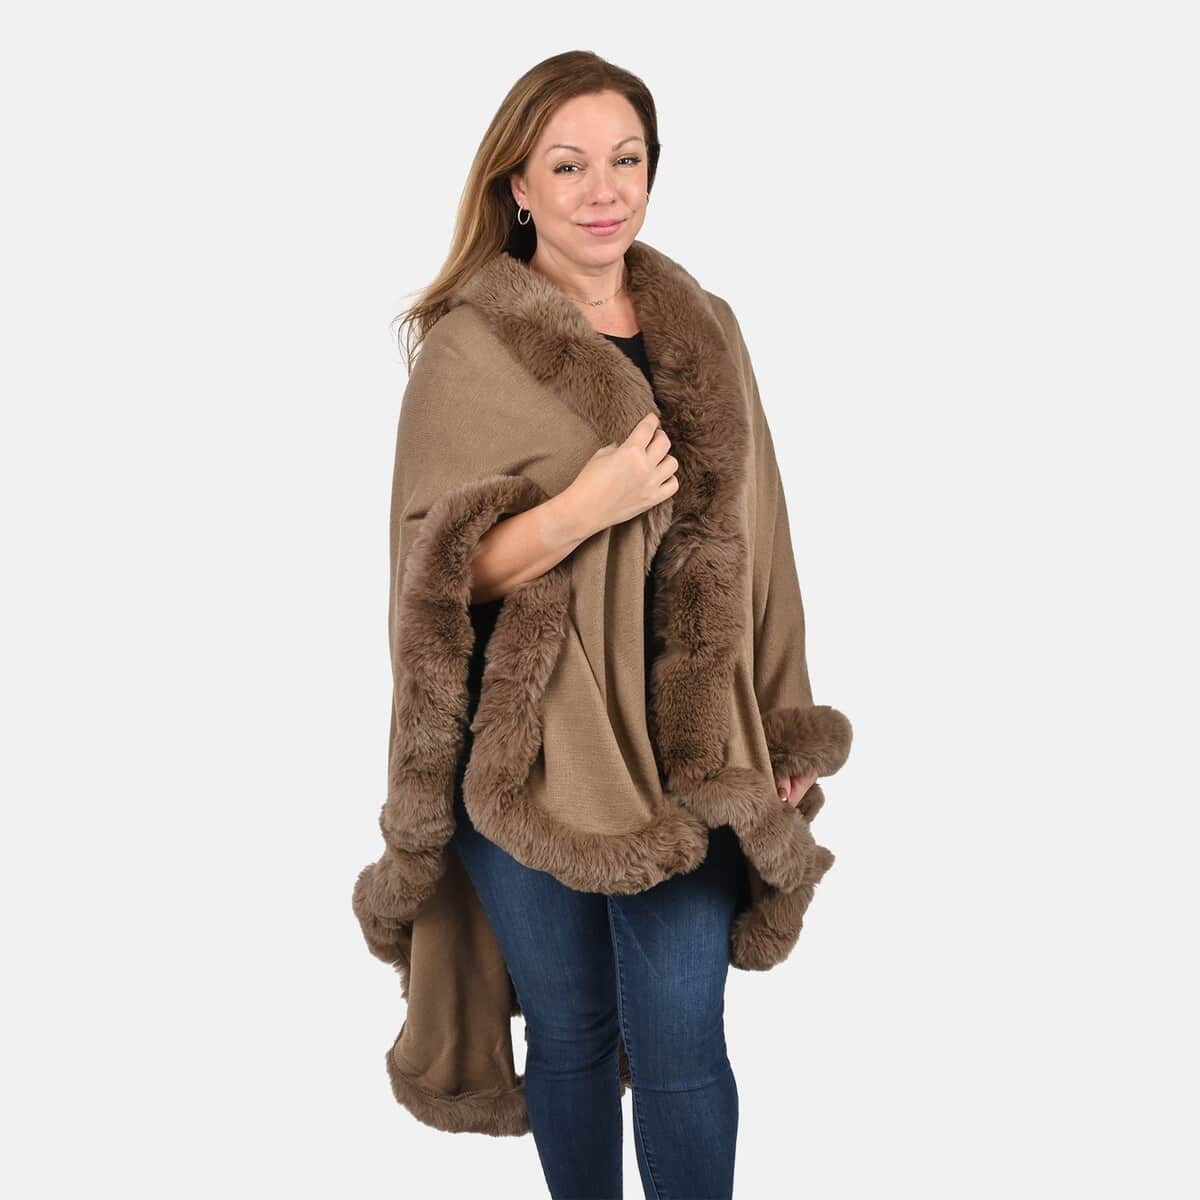 PASSAGE Beige Ruana with Faux Fur Trim - One Size Fits Most (31.5"x45.5") image number 3